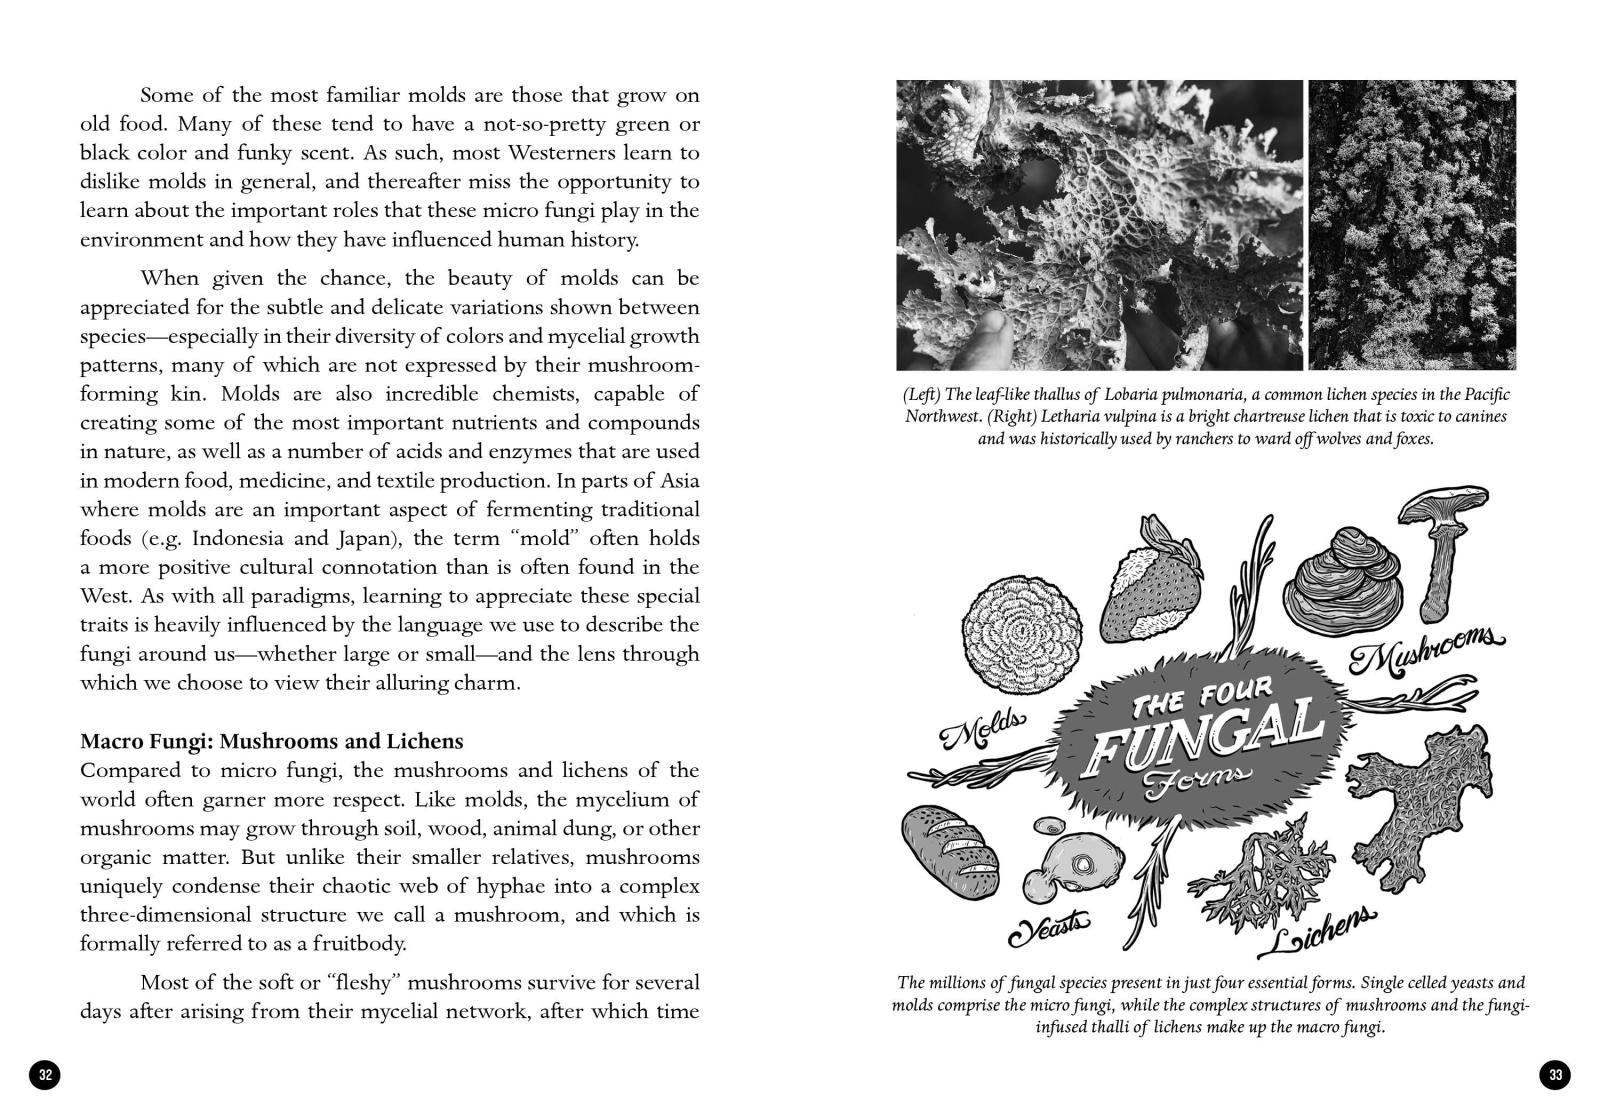 The Mycocultural Revolution: Transforming Our World with Mushrooms, Lichens, and Other Fungi